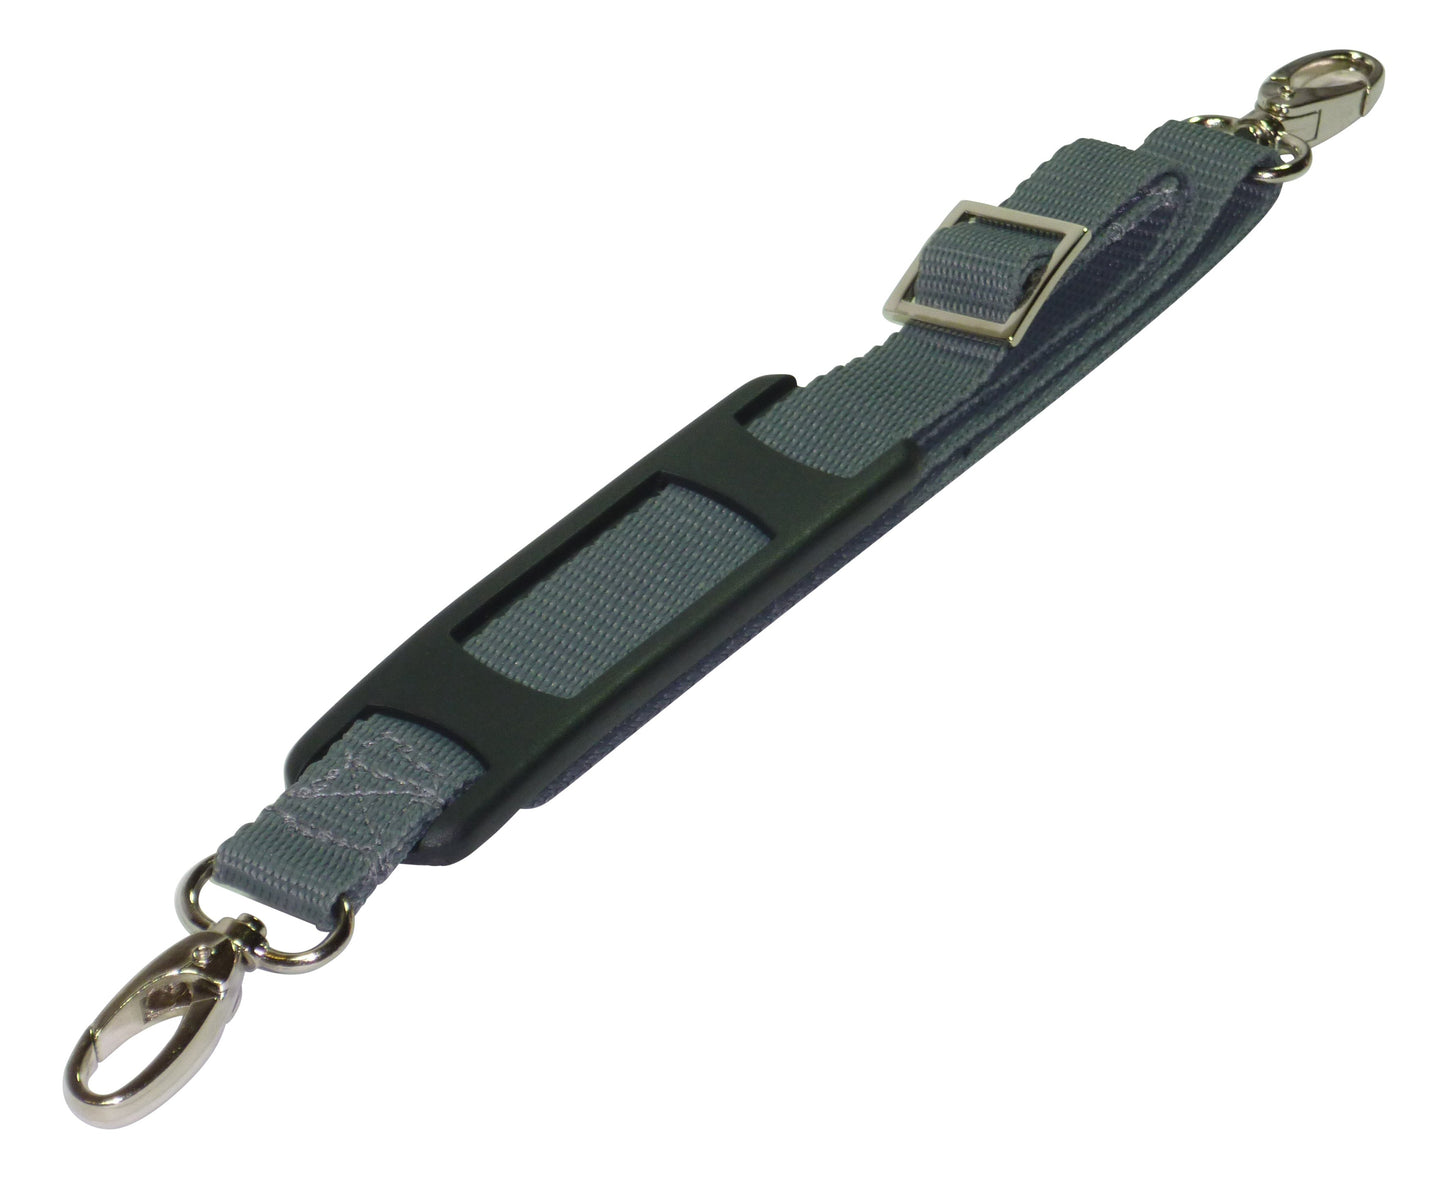 Benristraps 20mm Bag Strap with Metal Buckles and Shoulder Pad, 1 Metre in grey